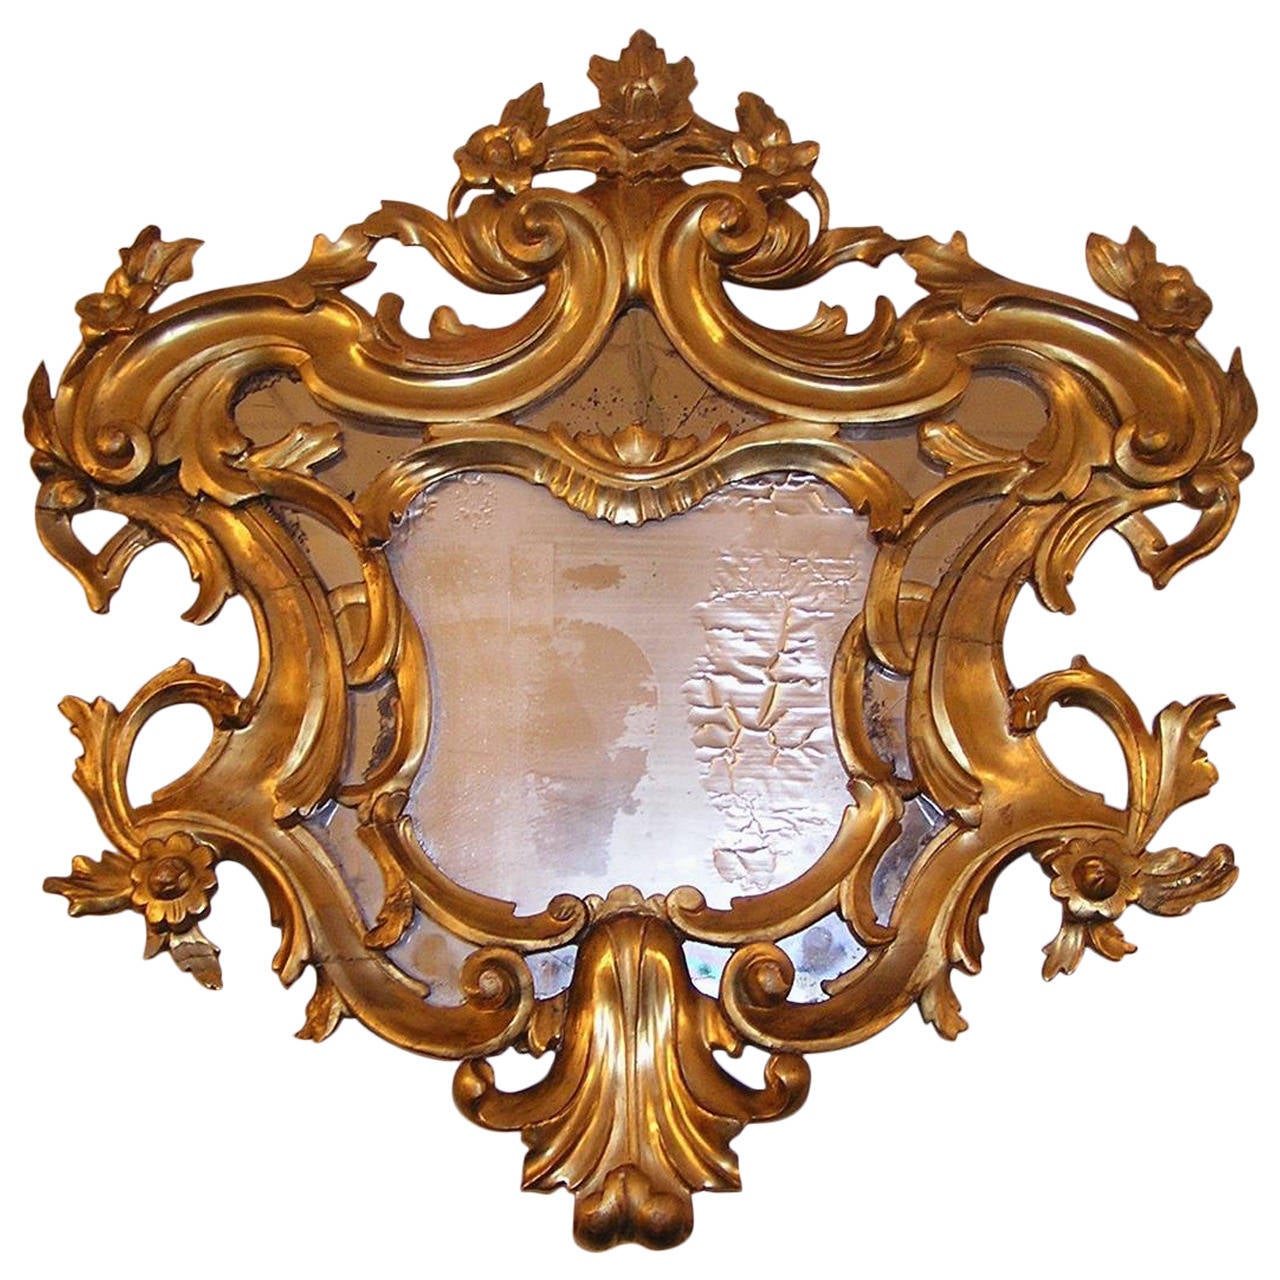 English Carved Wood Gilt Floral Wall Mirror, Circa 1780 For Sale at 1stdibs